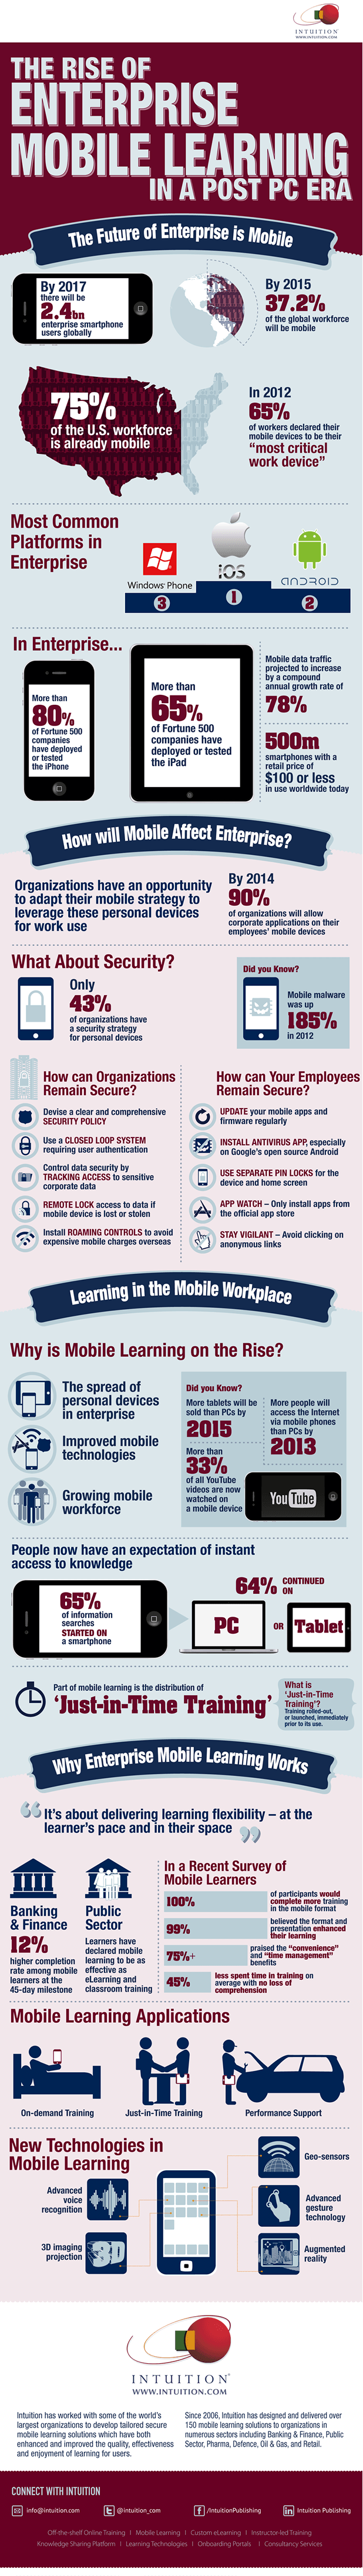 The Future of Enterprise Mobile Learning Infographic